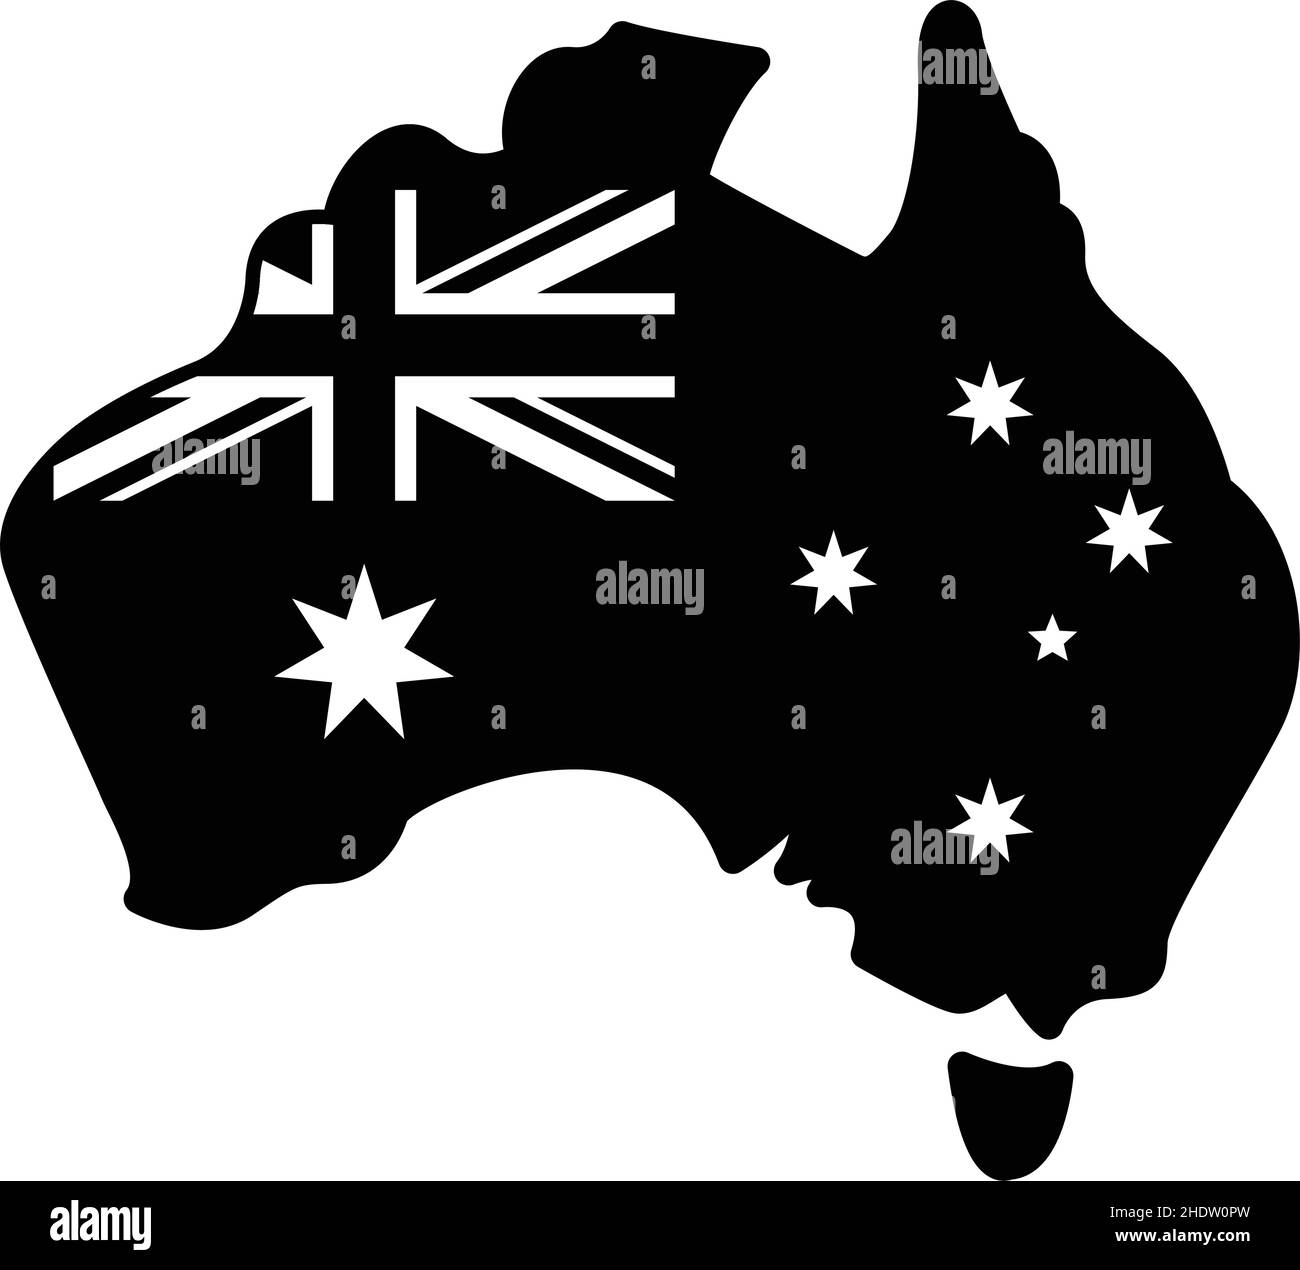 australia simplified flag map icon emblem black and white vector isolated on white background Stock Vector